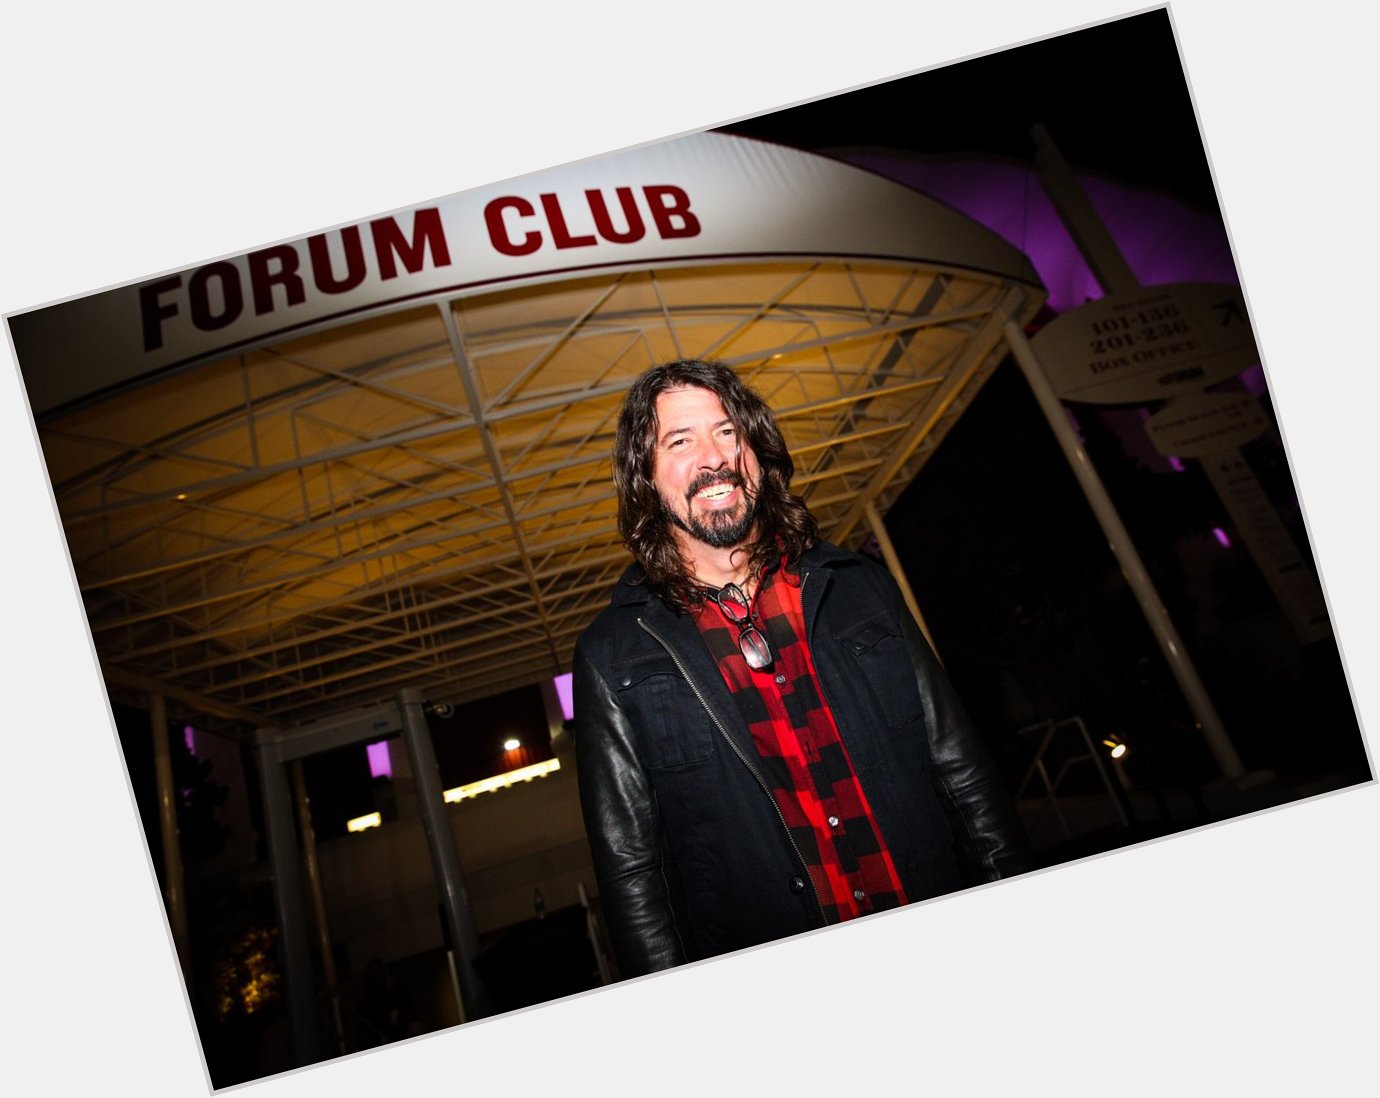 Happy birthday to a Forum favorite, Dave Grohl!   